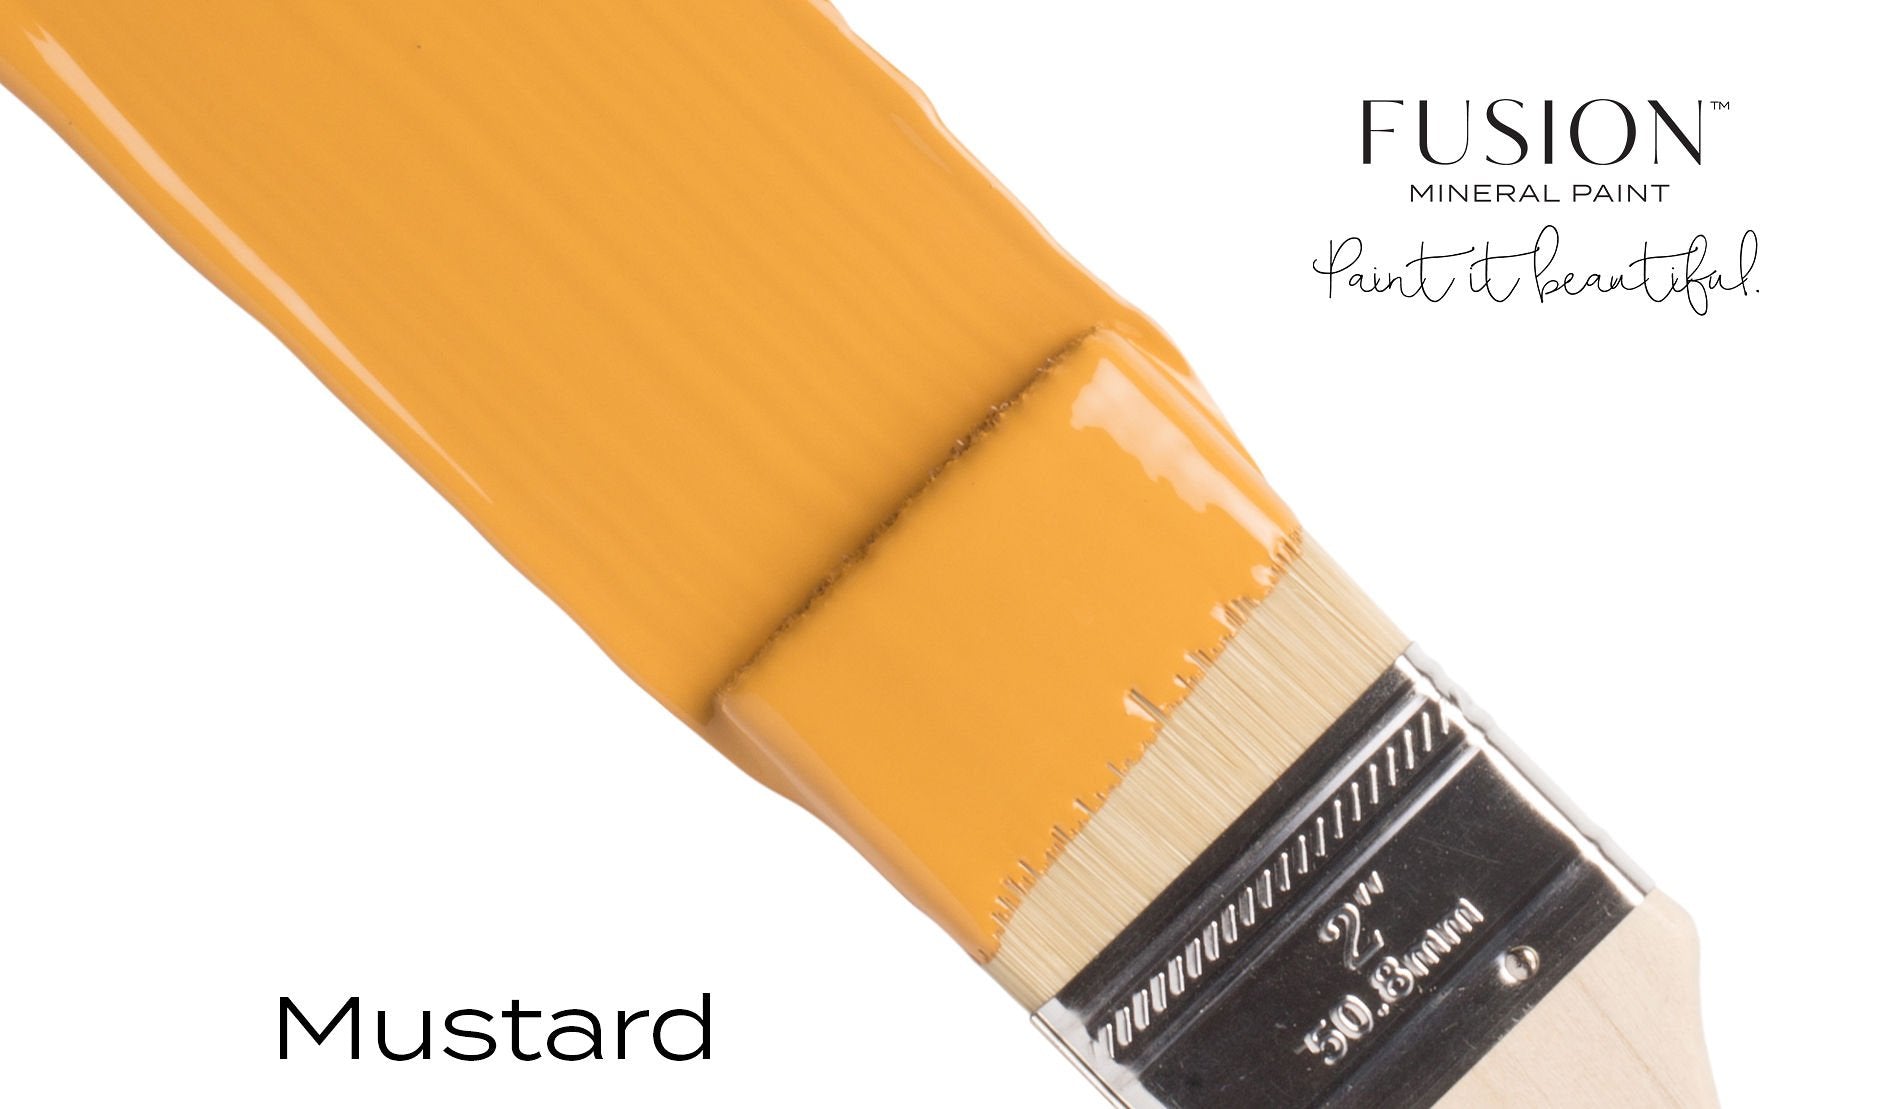 Mustard - Fusion Mineral Paint